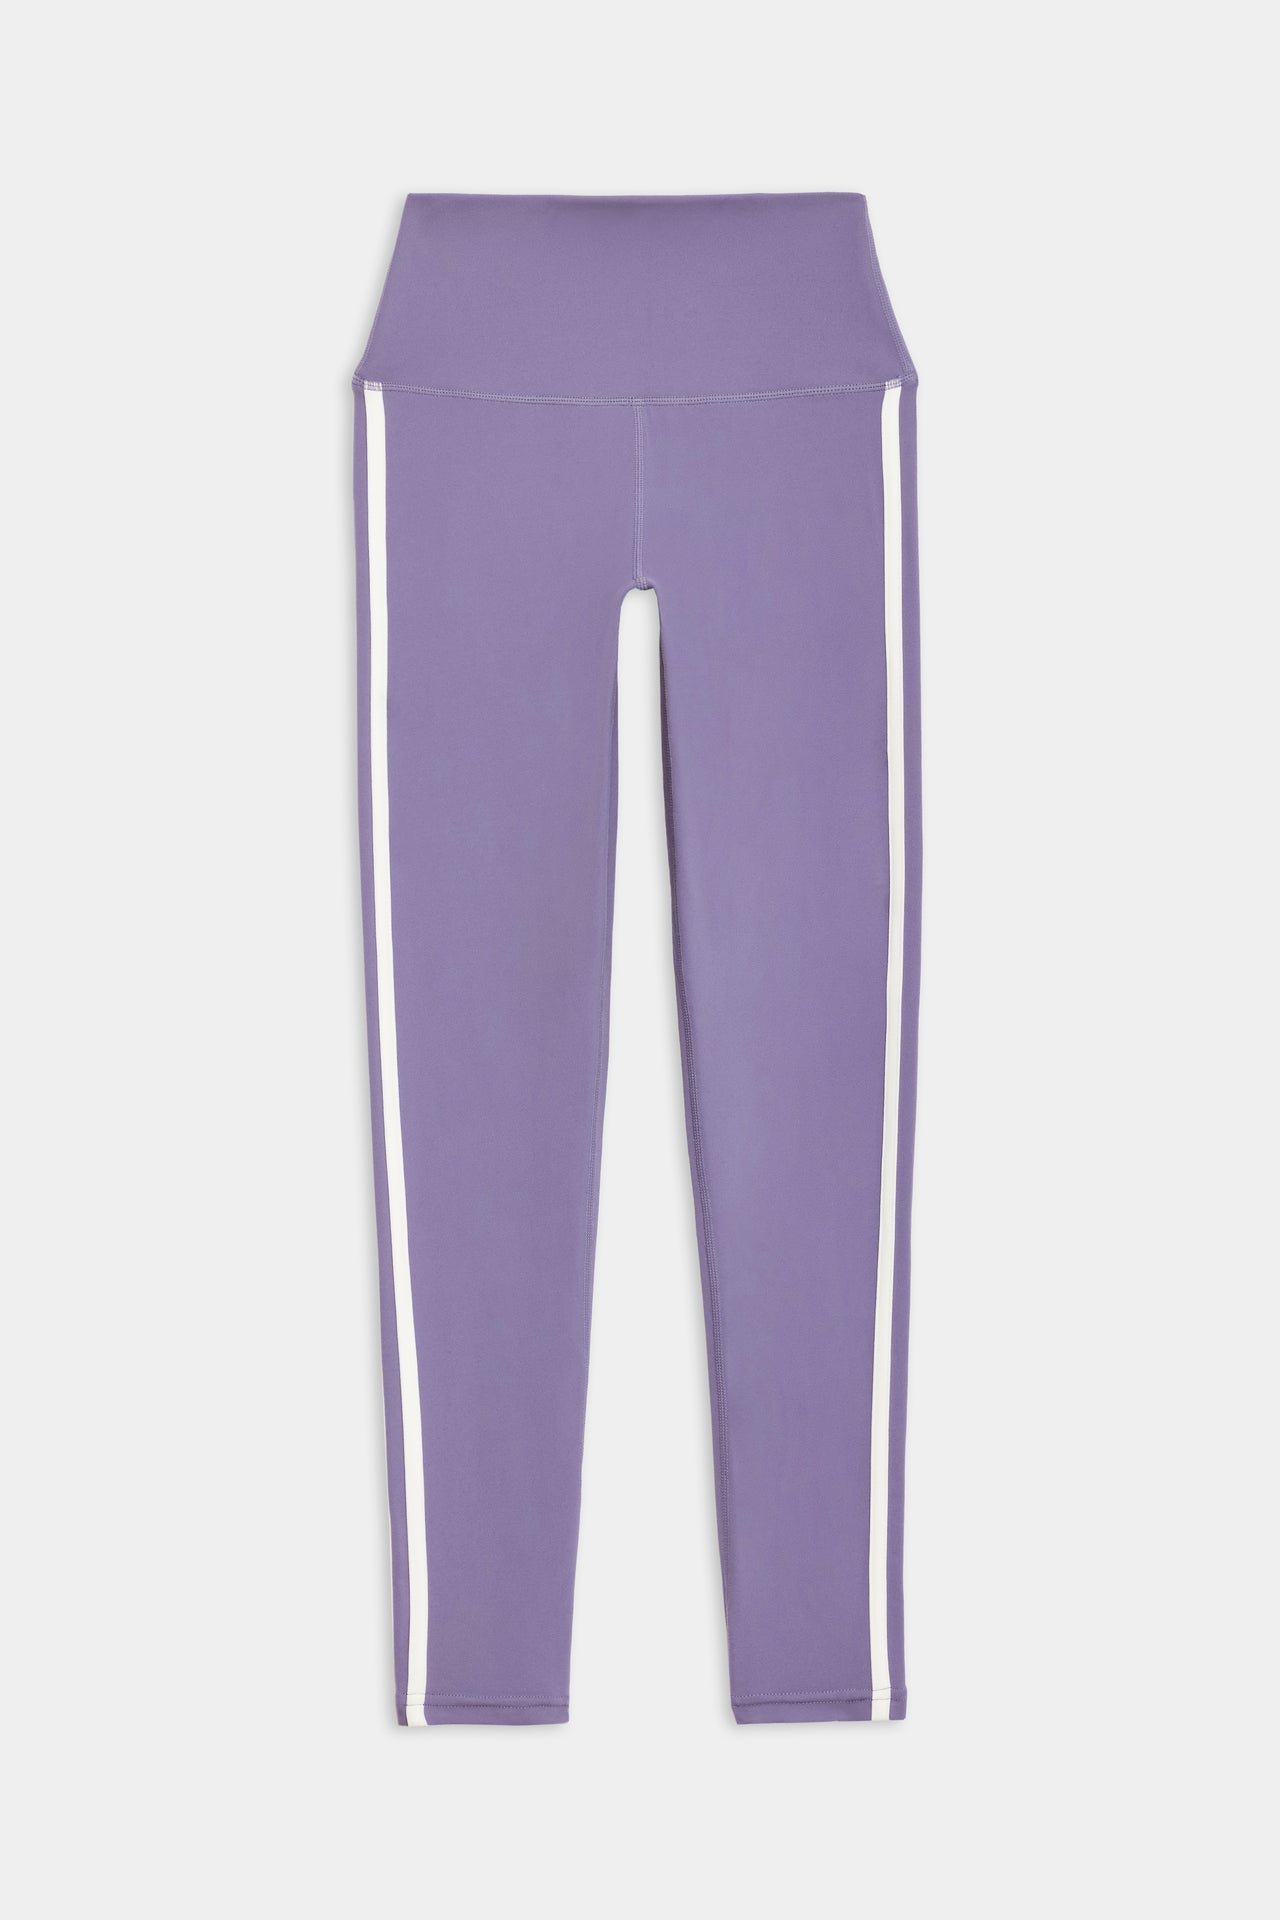 Flat view of light purple leggings with two white stripes down the side